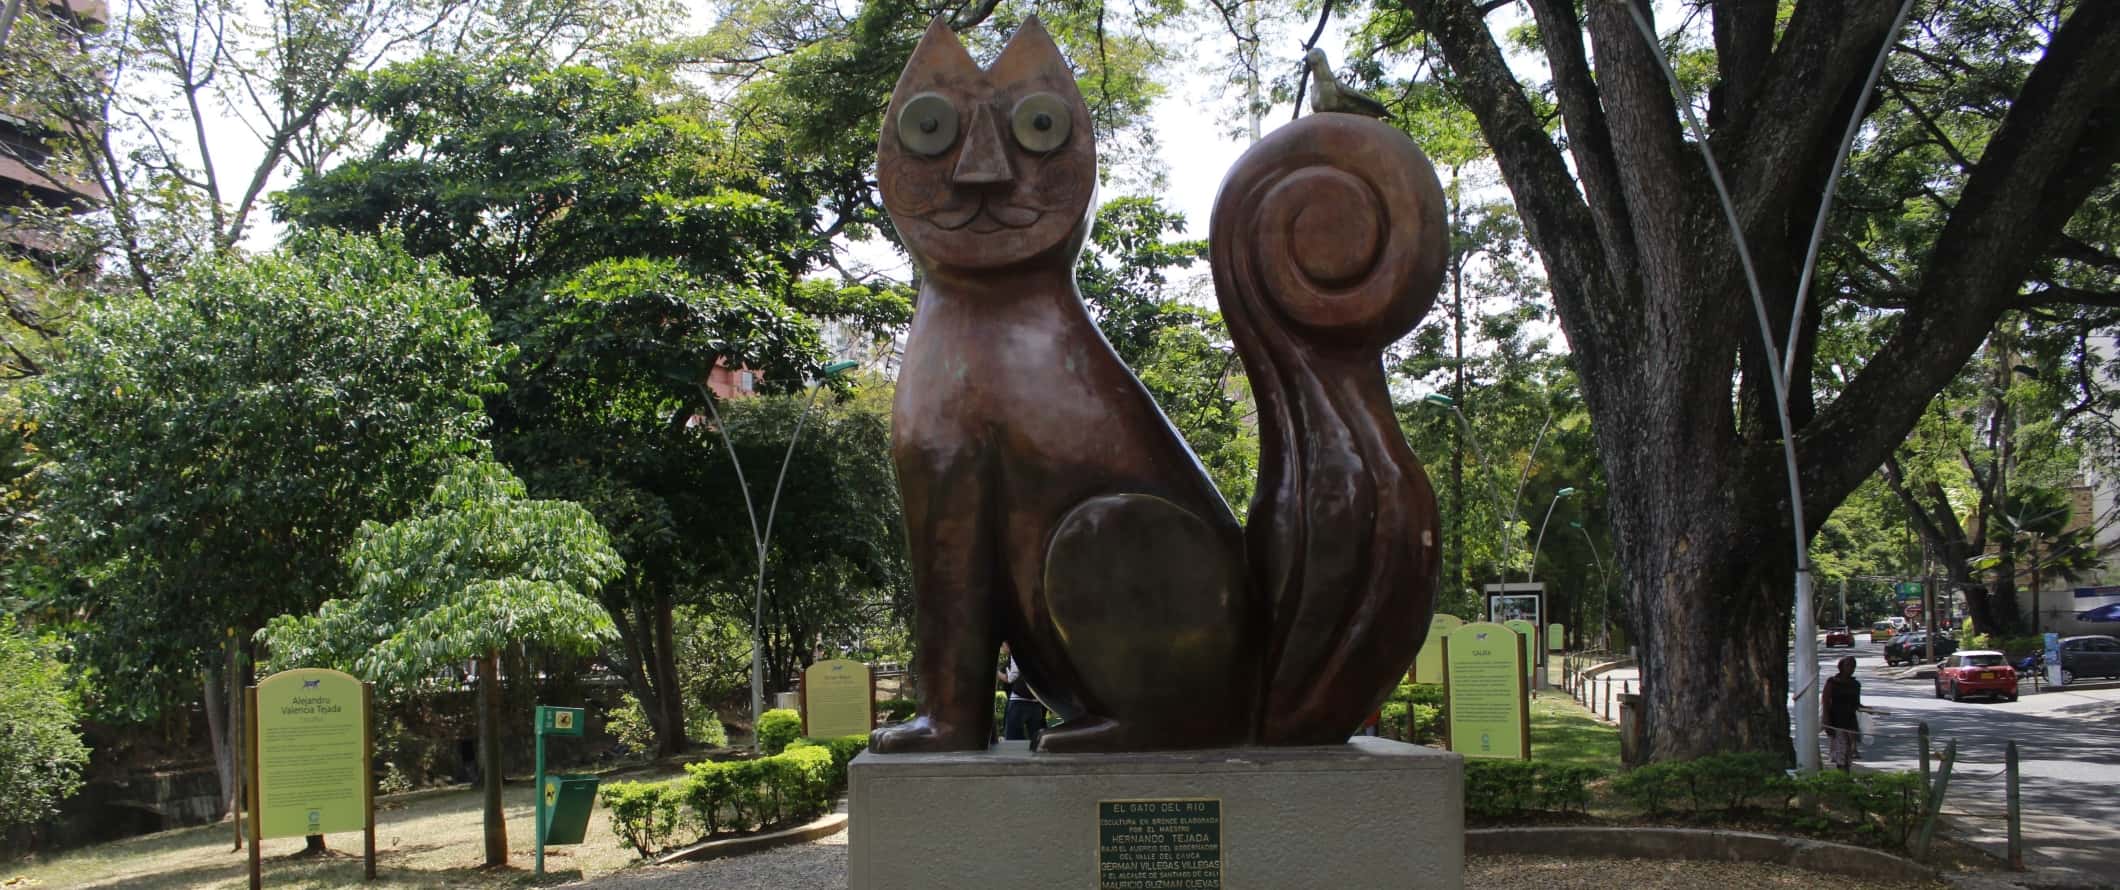 The huge bronze statue of a cat in a park in Cali, Colombia